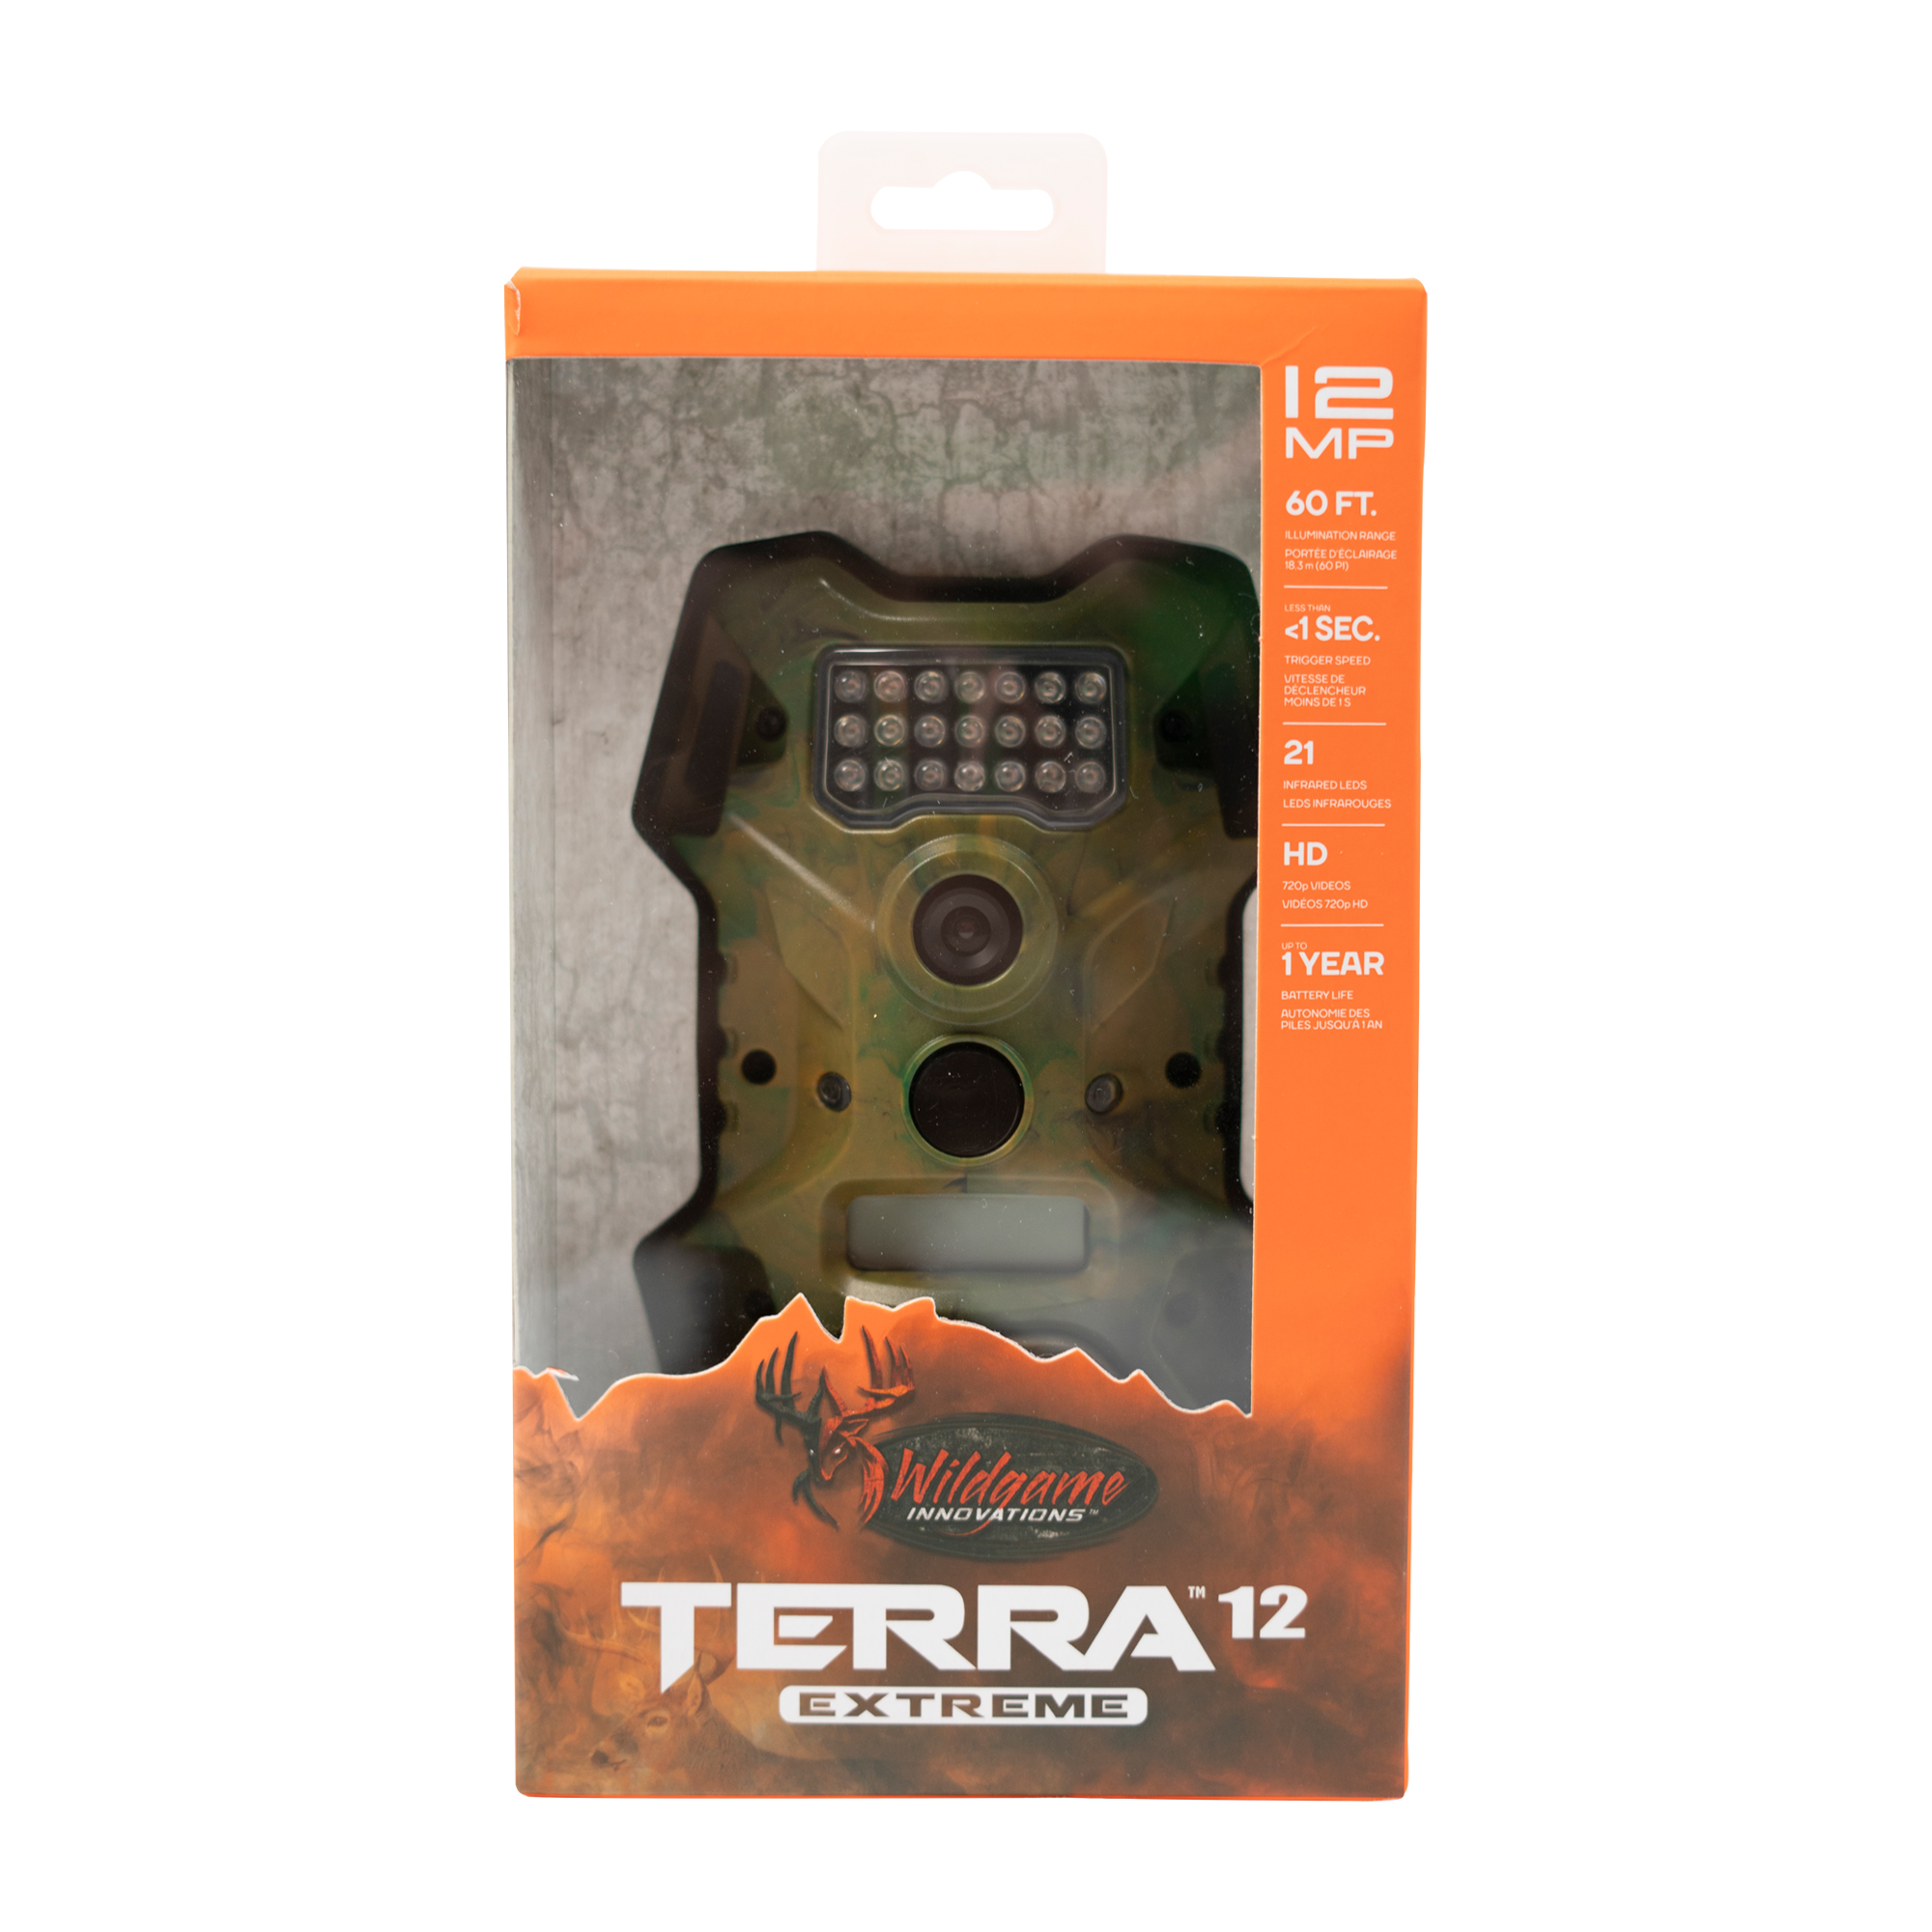 Wildgame Innovations Terra Extreme 12 MP HD Infrared Digital Scouting Game Camera - image 4 of 15